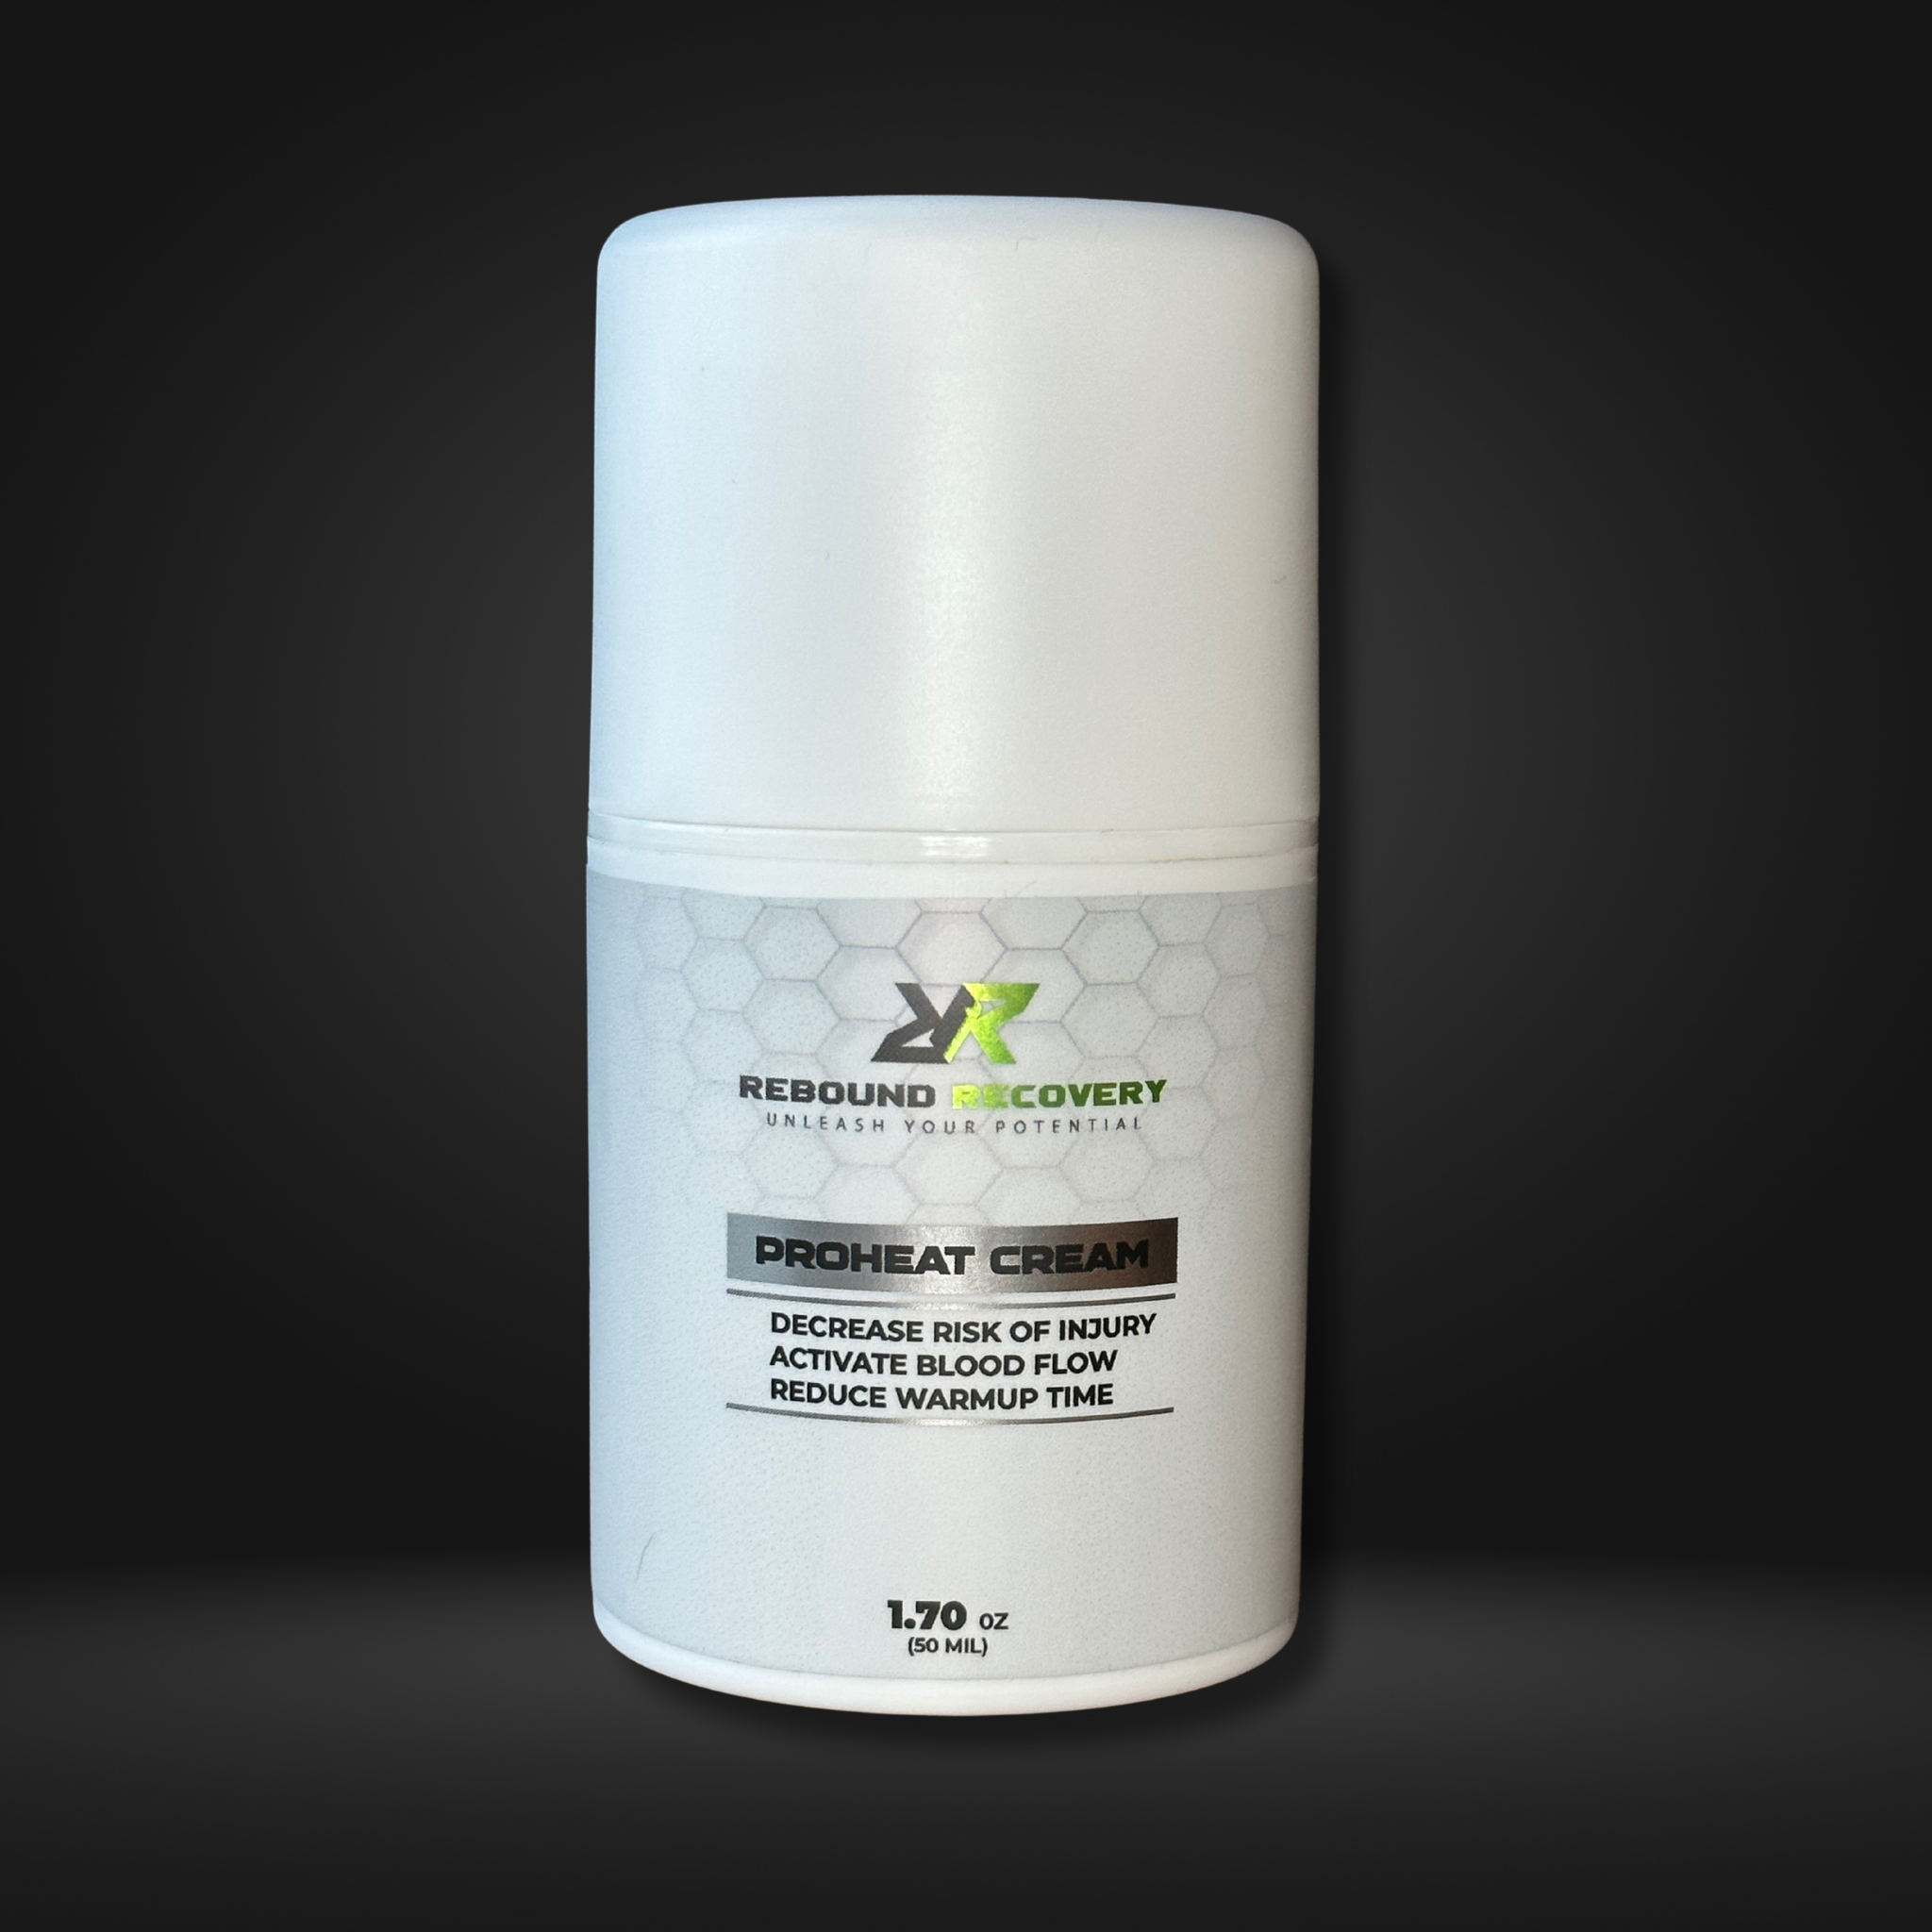 Natural Pre-workout warming topical by Rebound Recovery, ProHeat Cream.